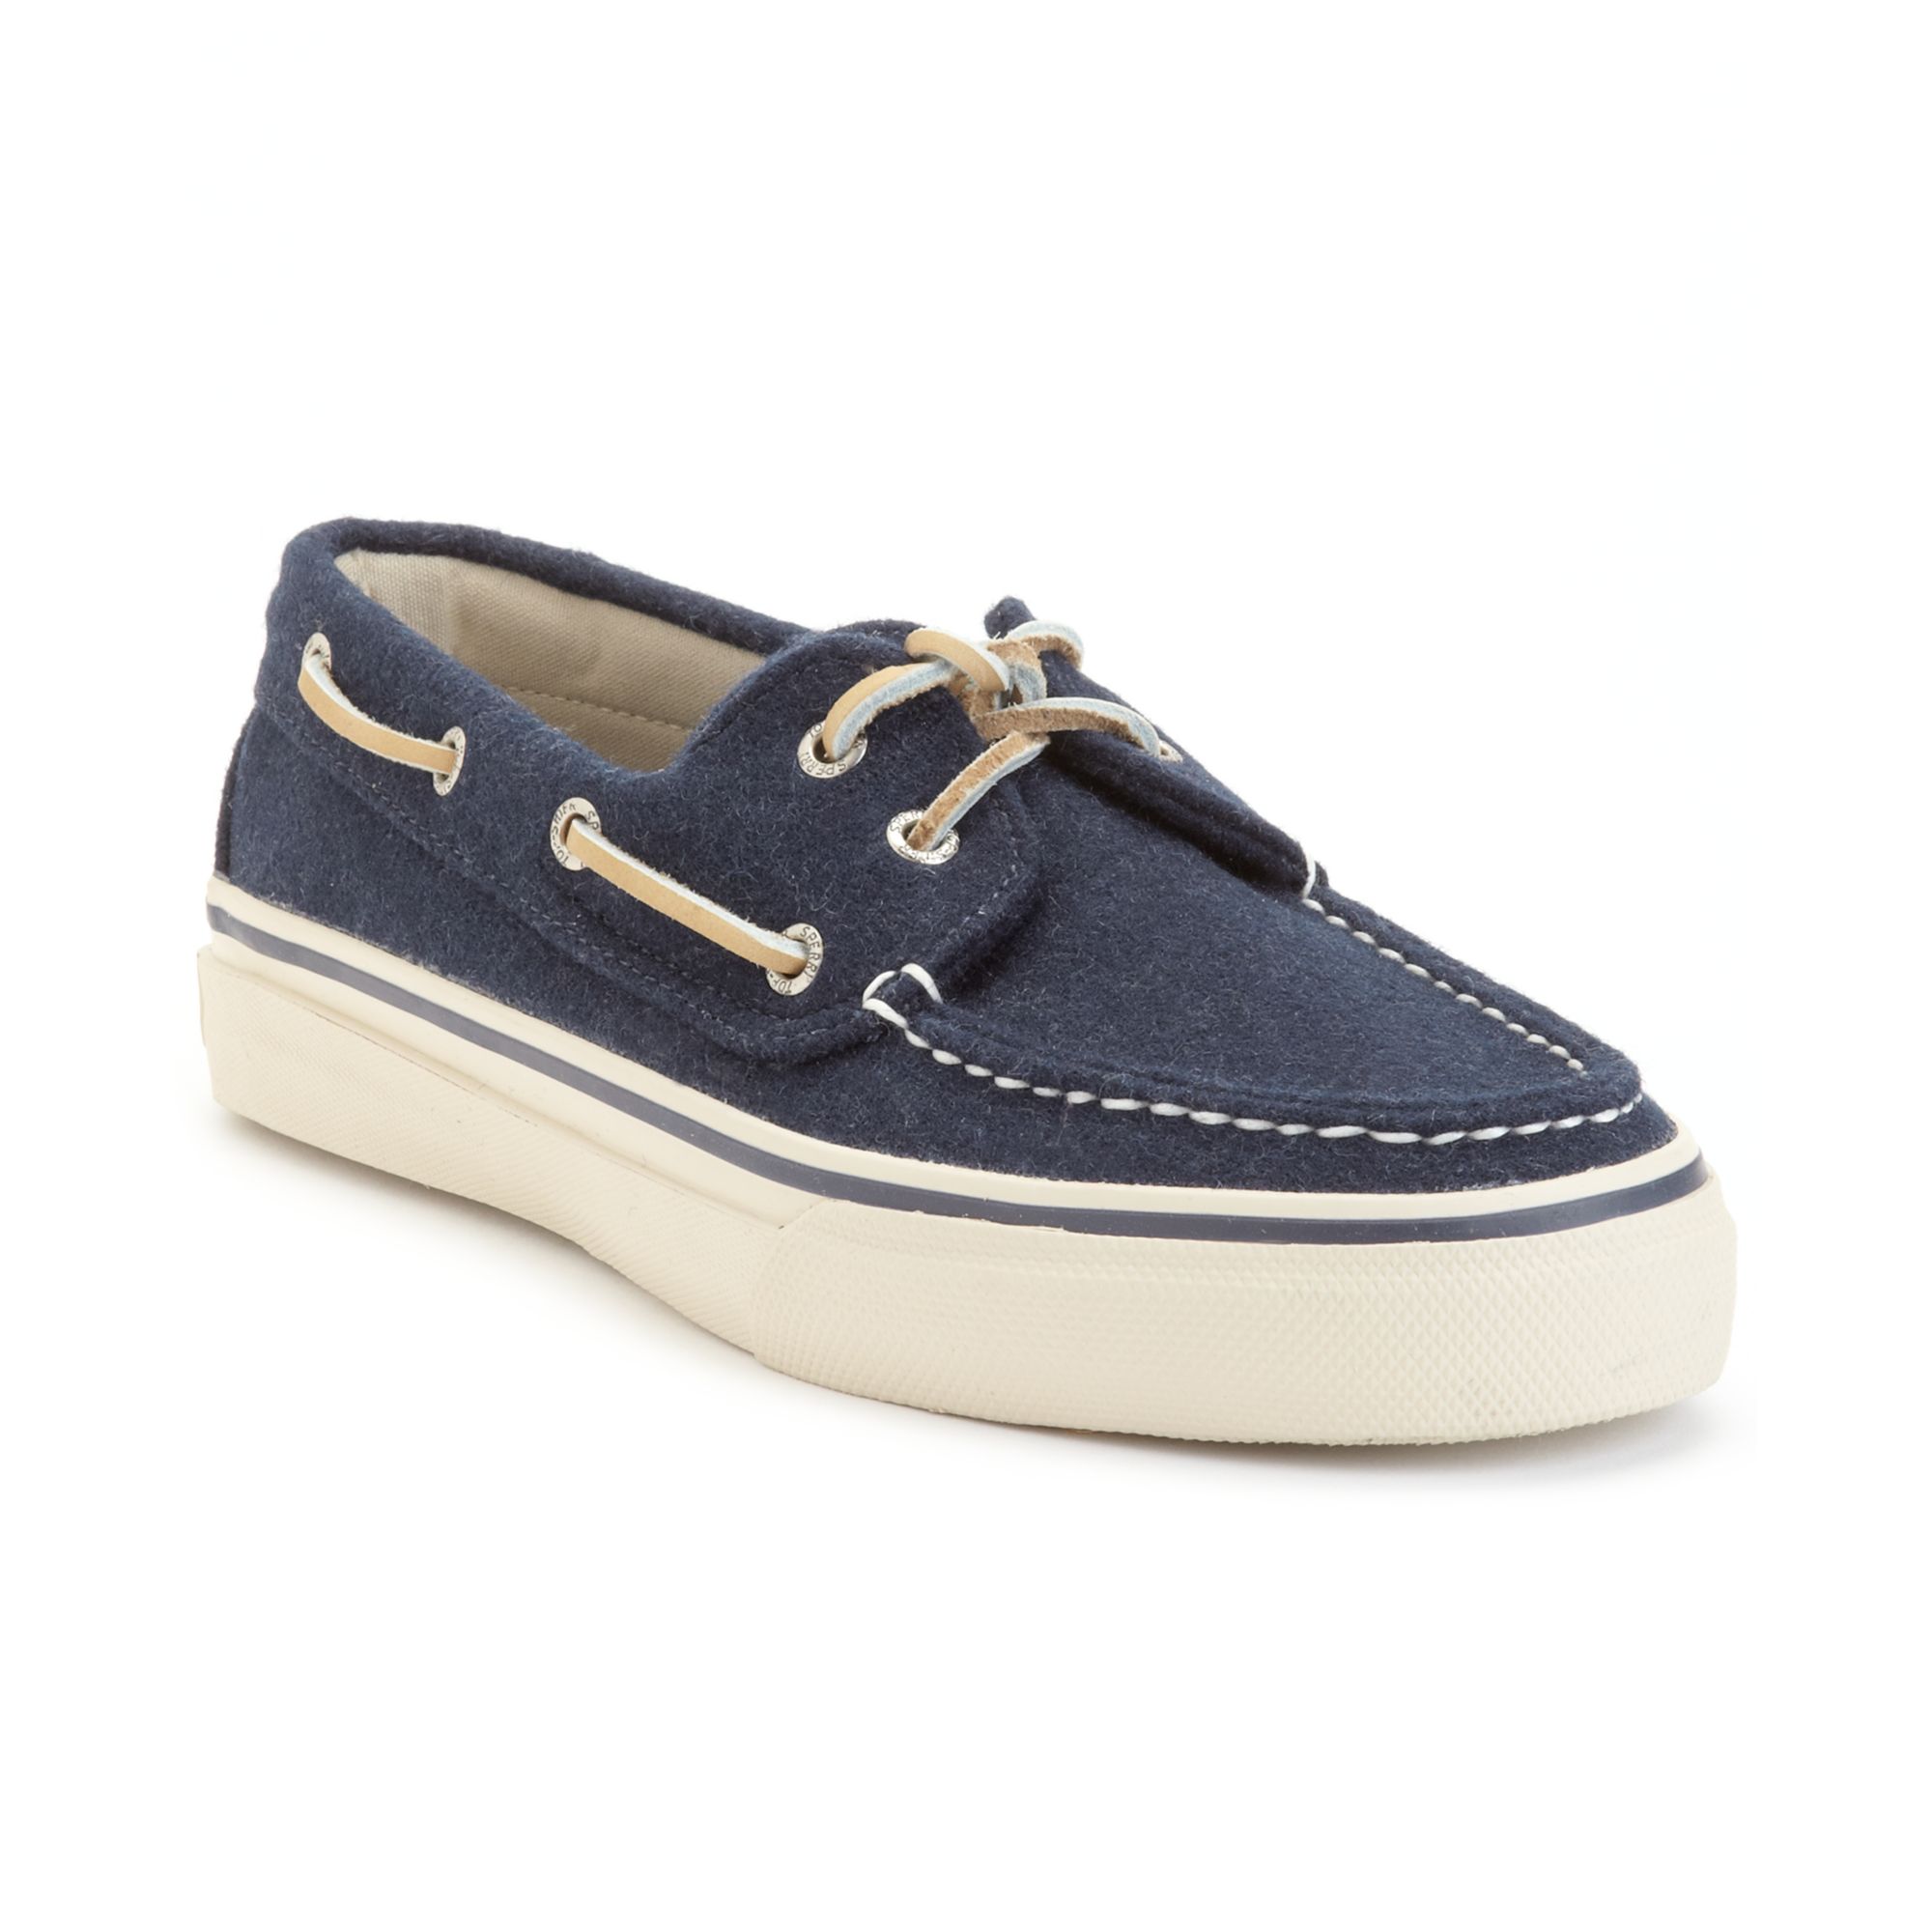 men's sperry boat shoes navy blue